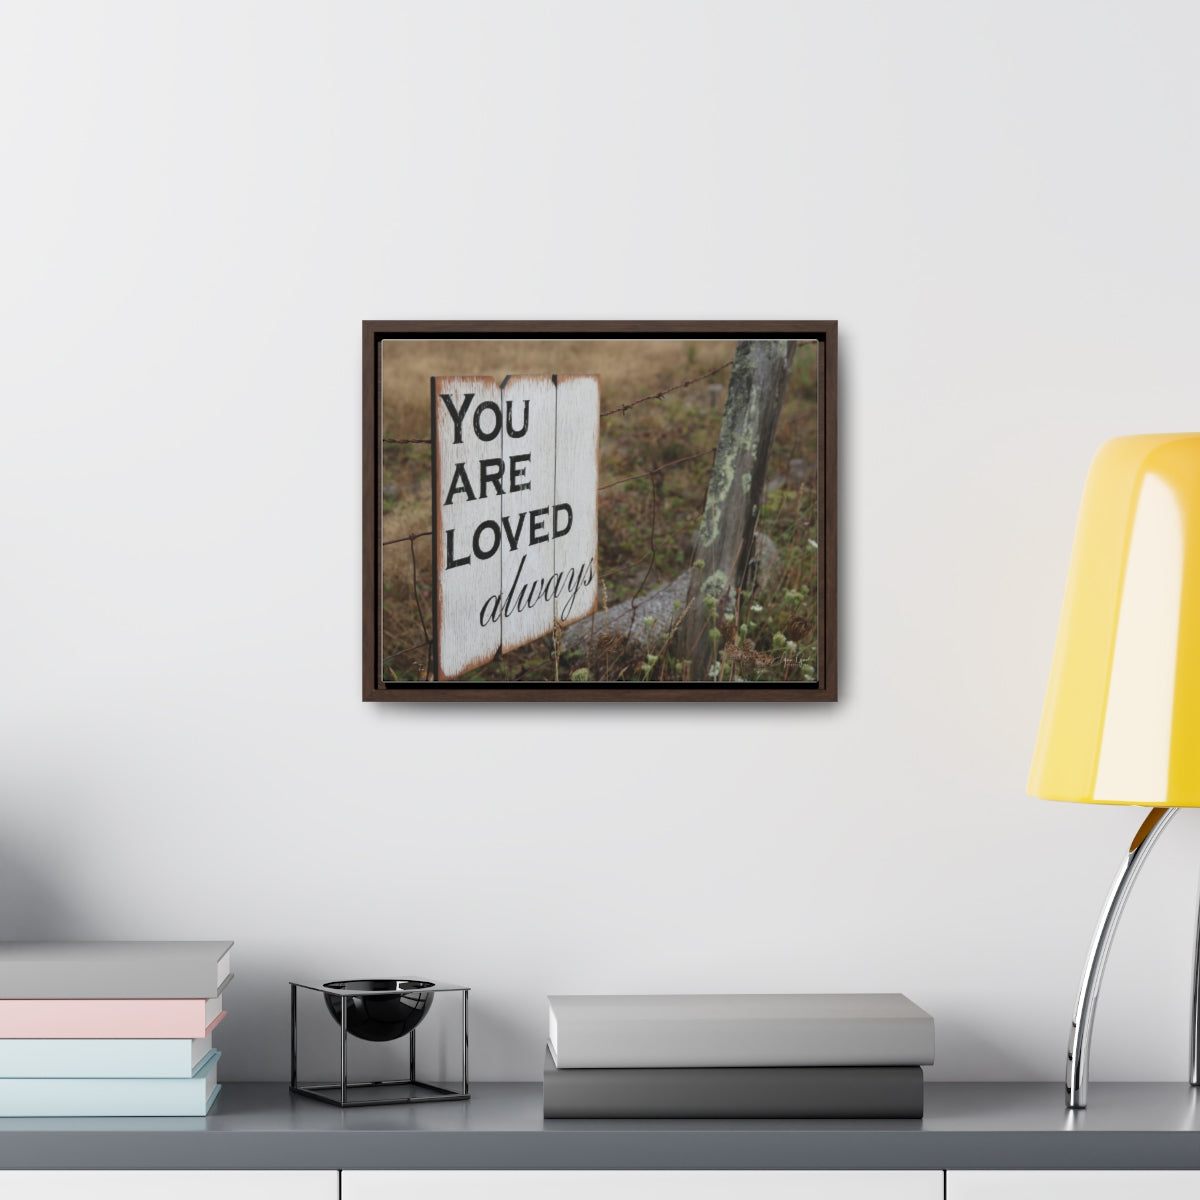 You are loved - framed canvas